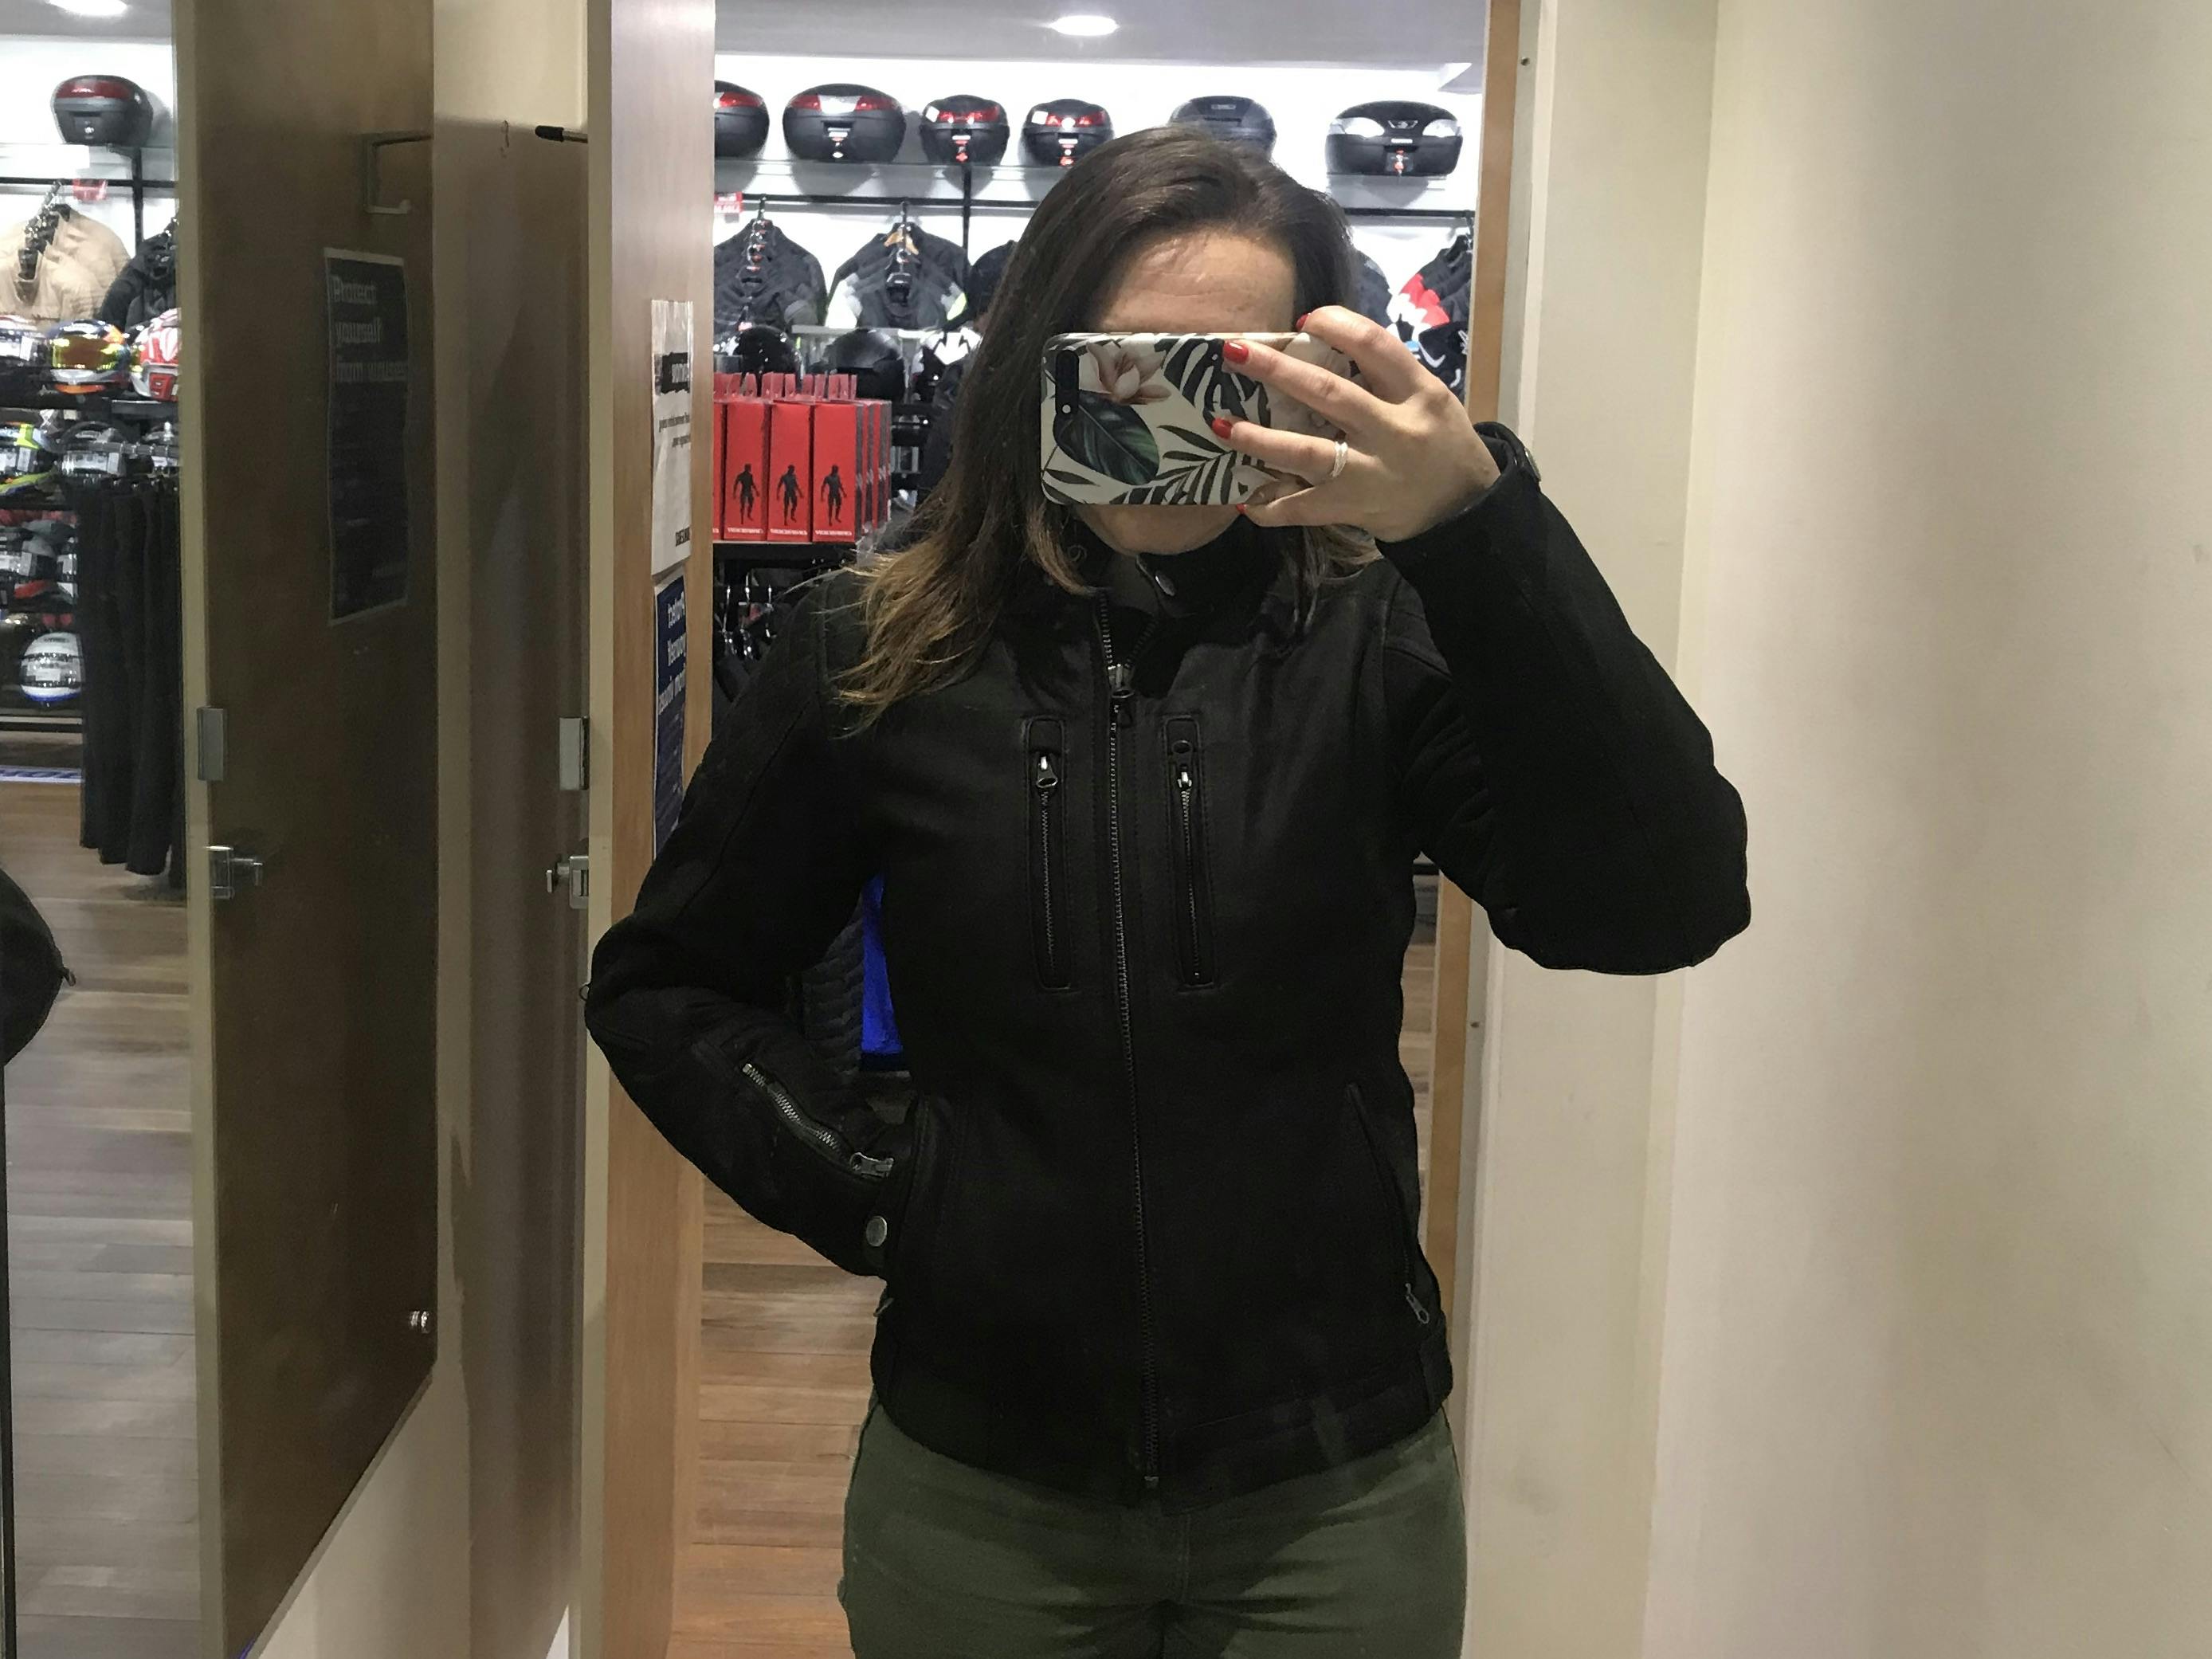 A woman in the Merlin Mia black leather motorcycle jacket